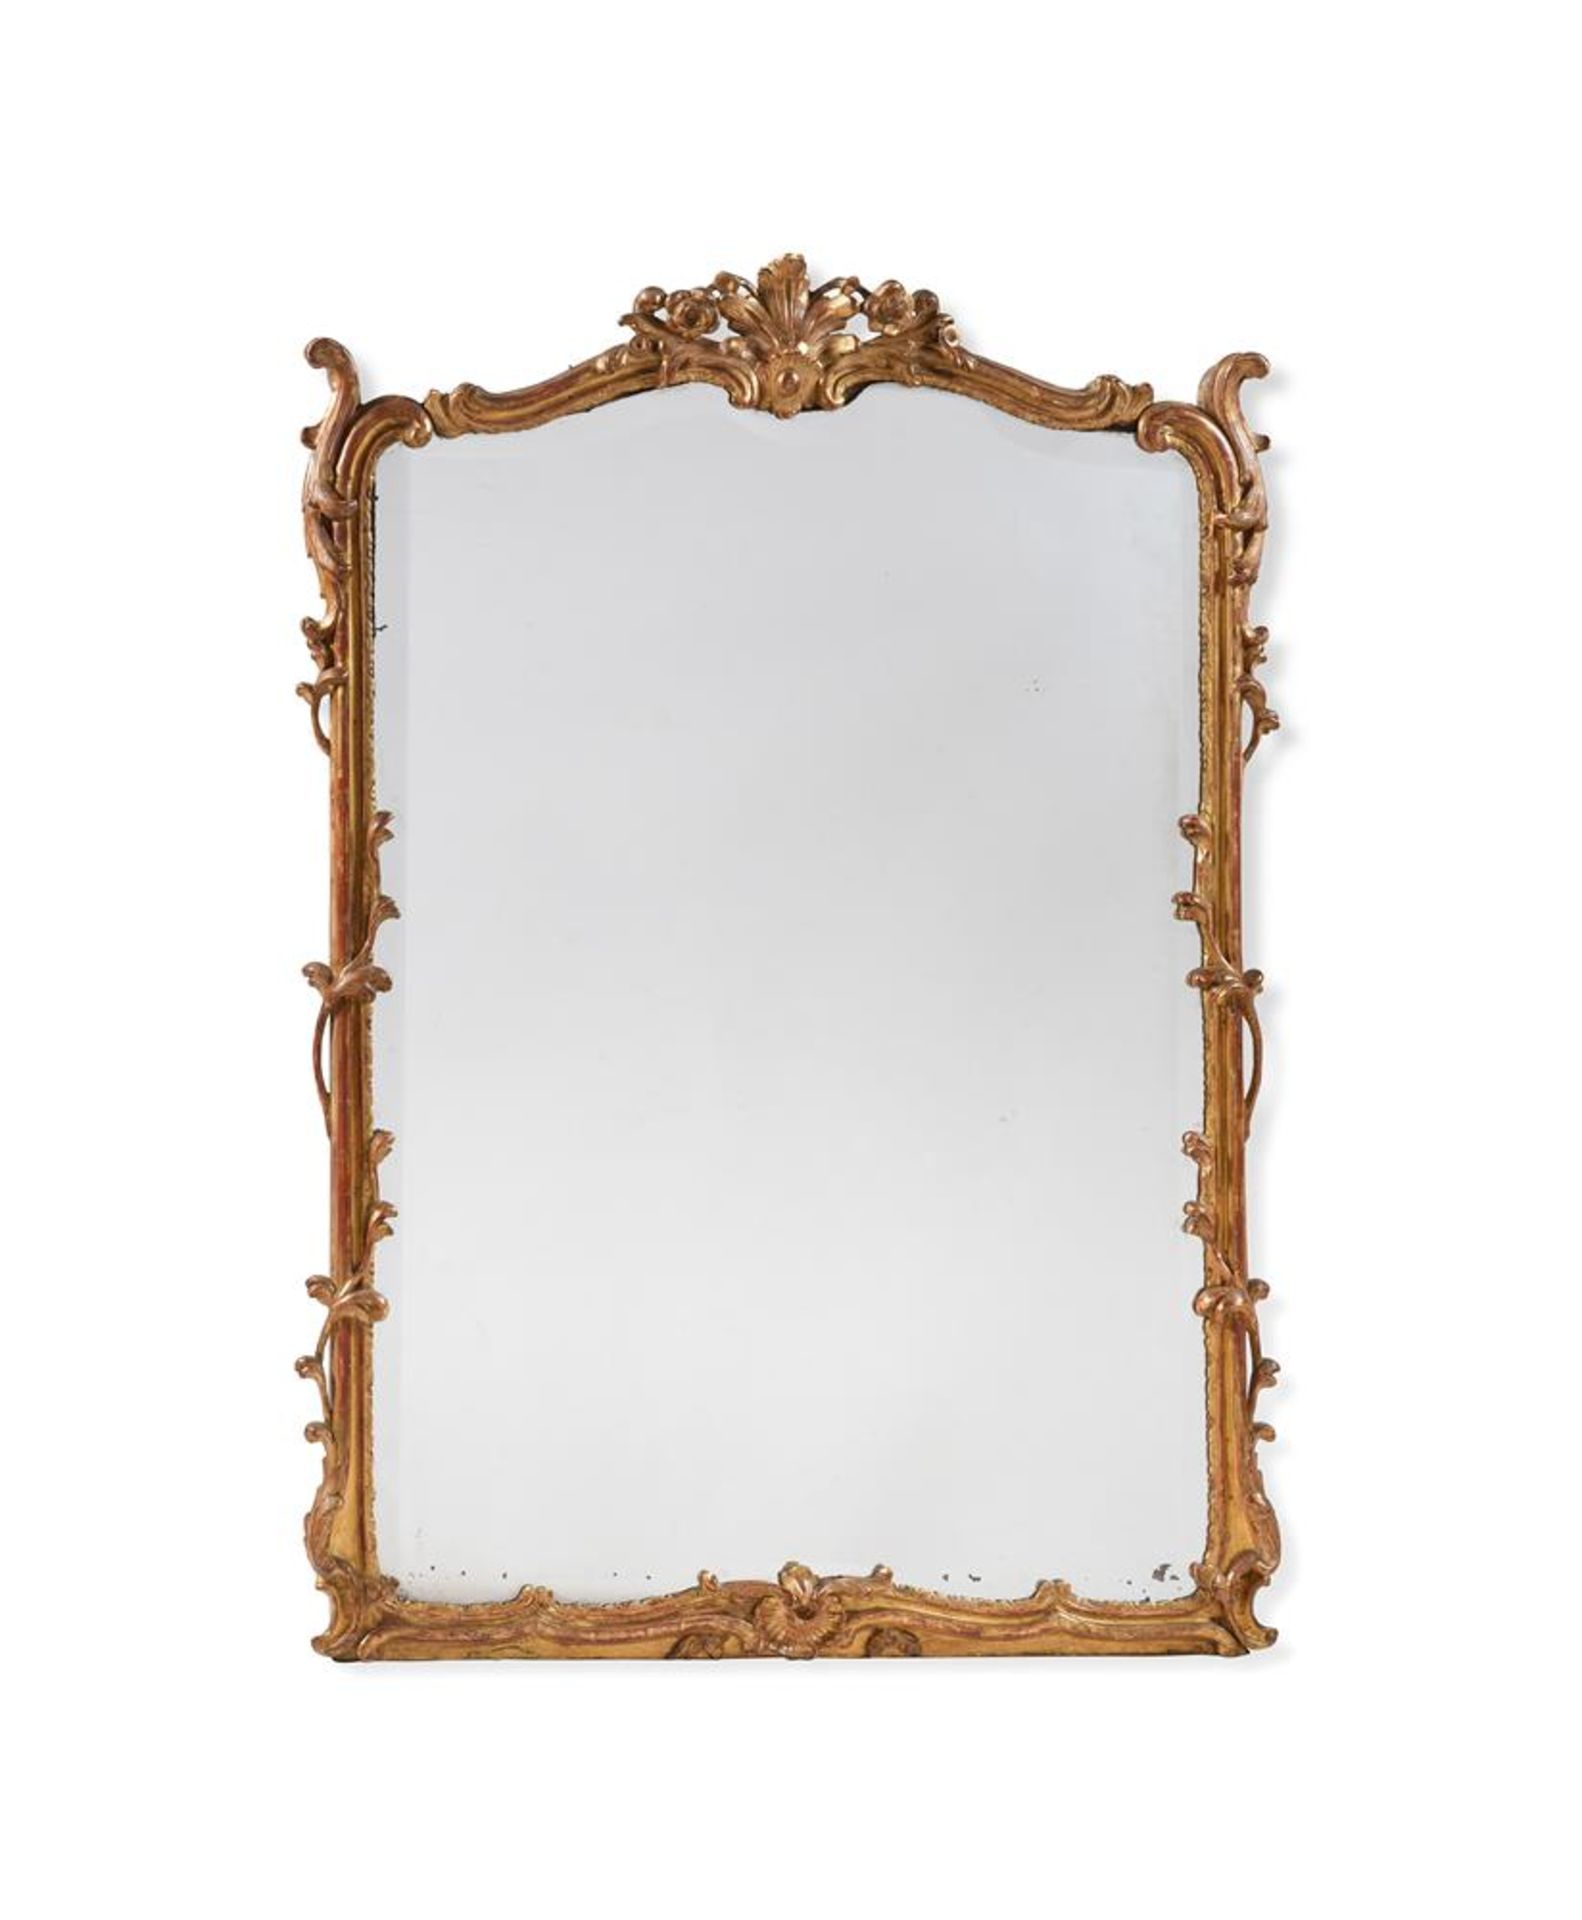 A FRENCH GILTWOOD WALL MIRROR IN LOUIS XVI STYLE